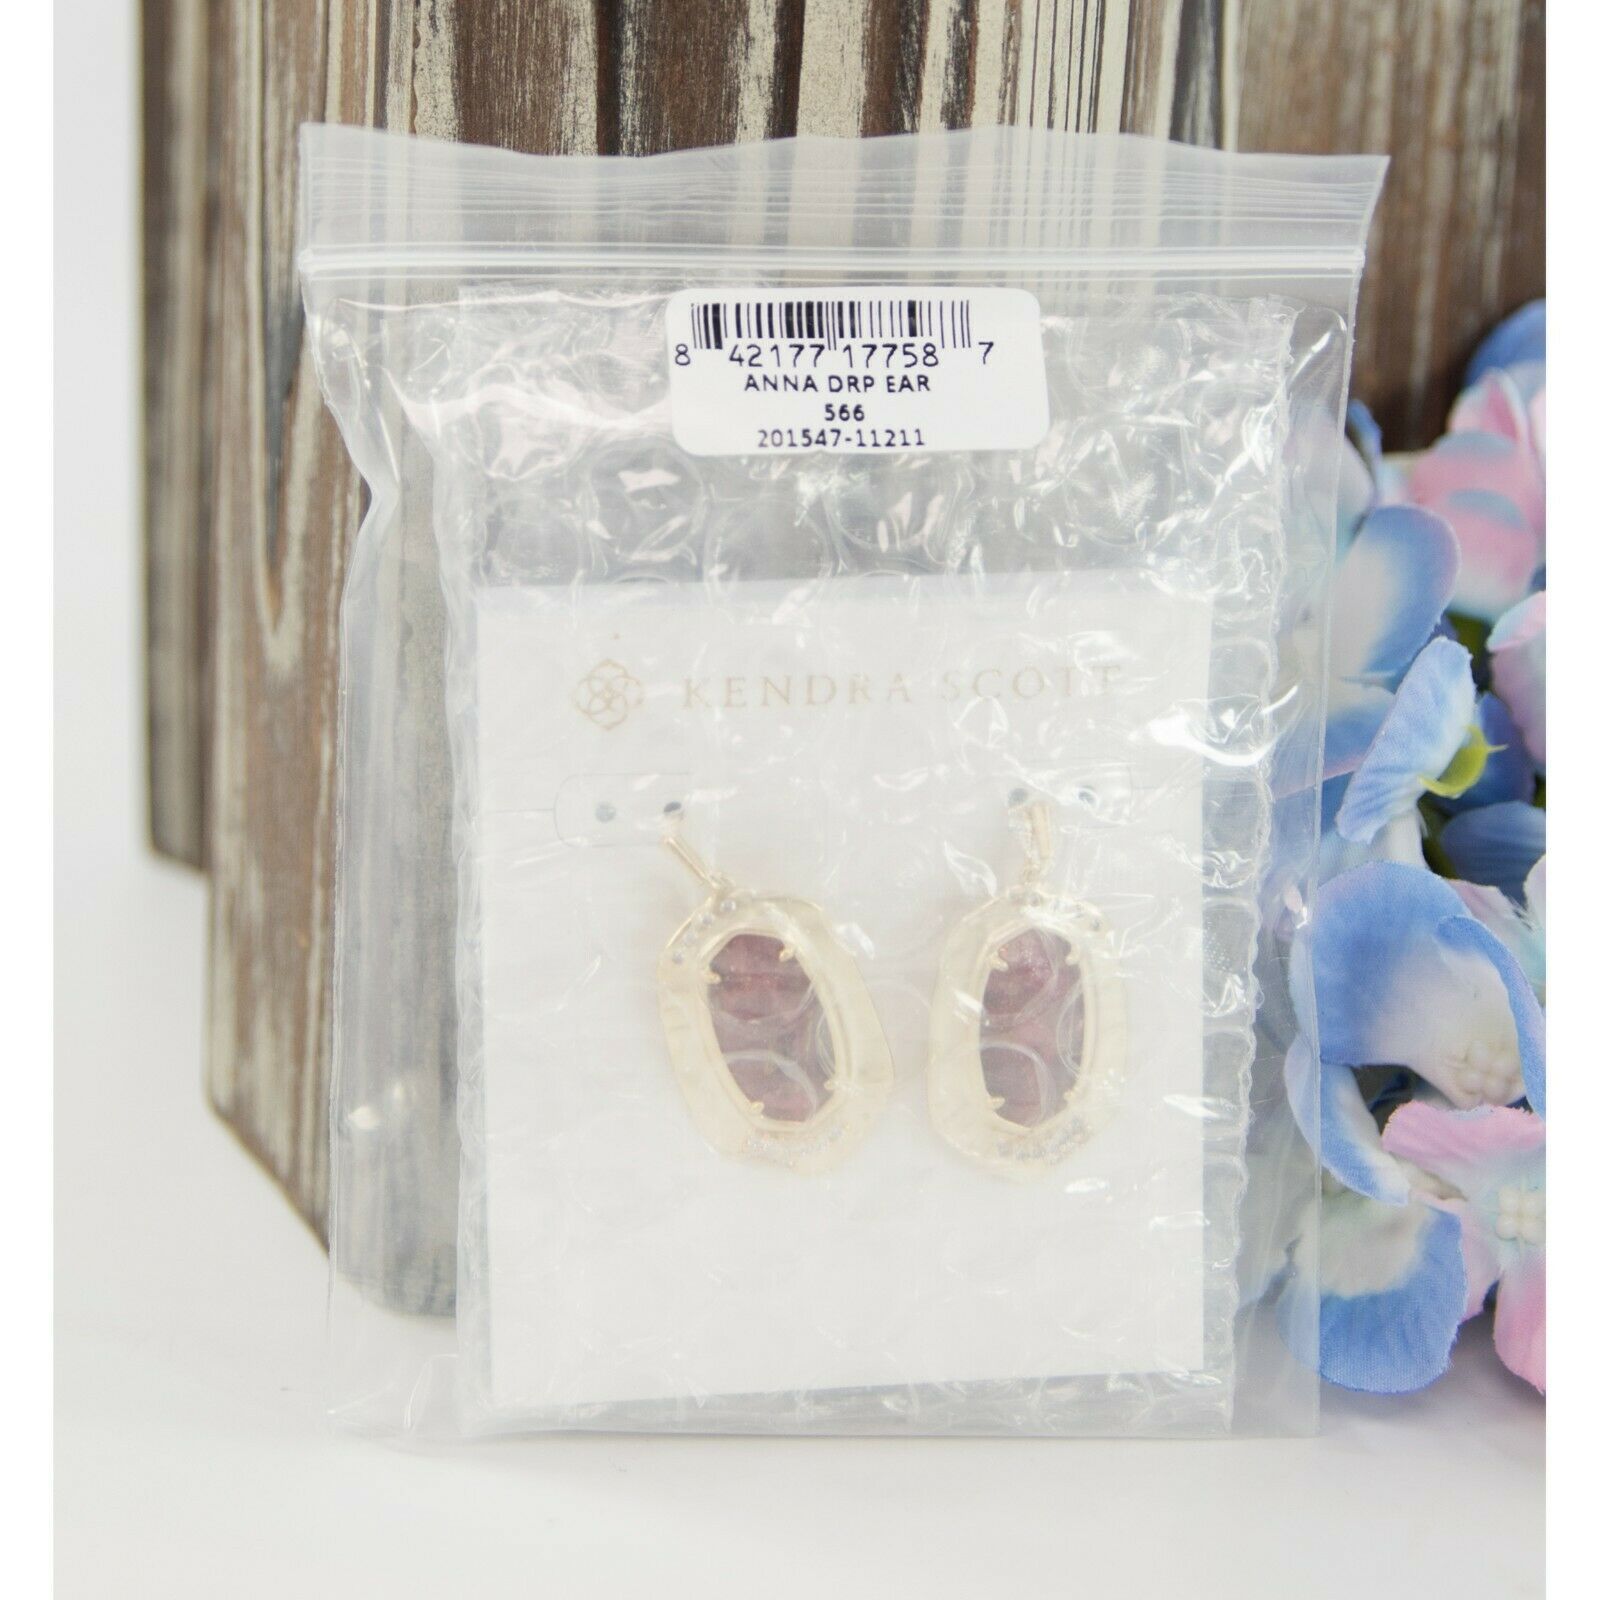 Primary image for Kendra Scott Anna Bronze Veined Maroon Jade Gold Drop Dangle Earrings NWT